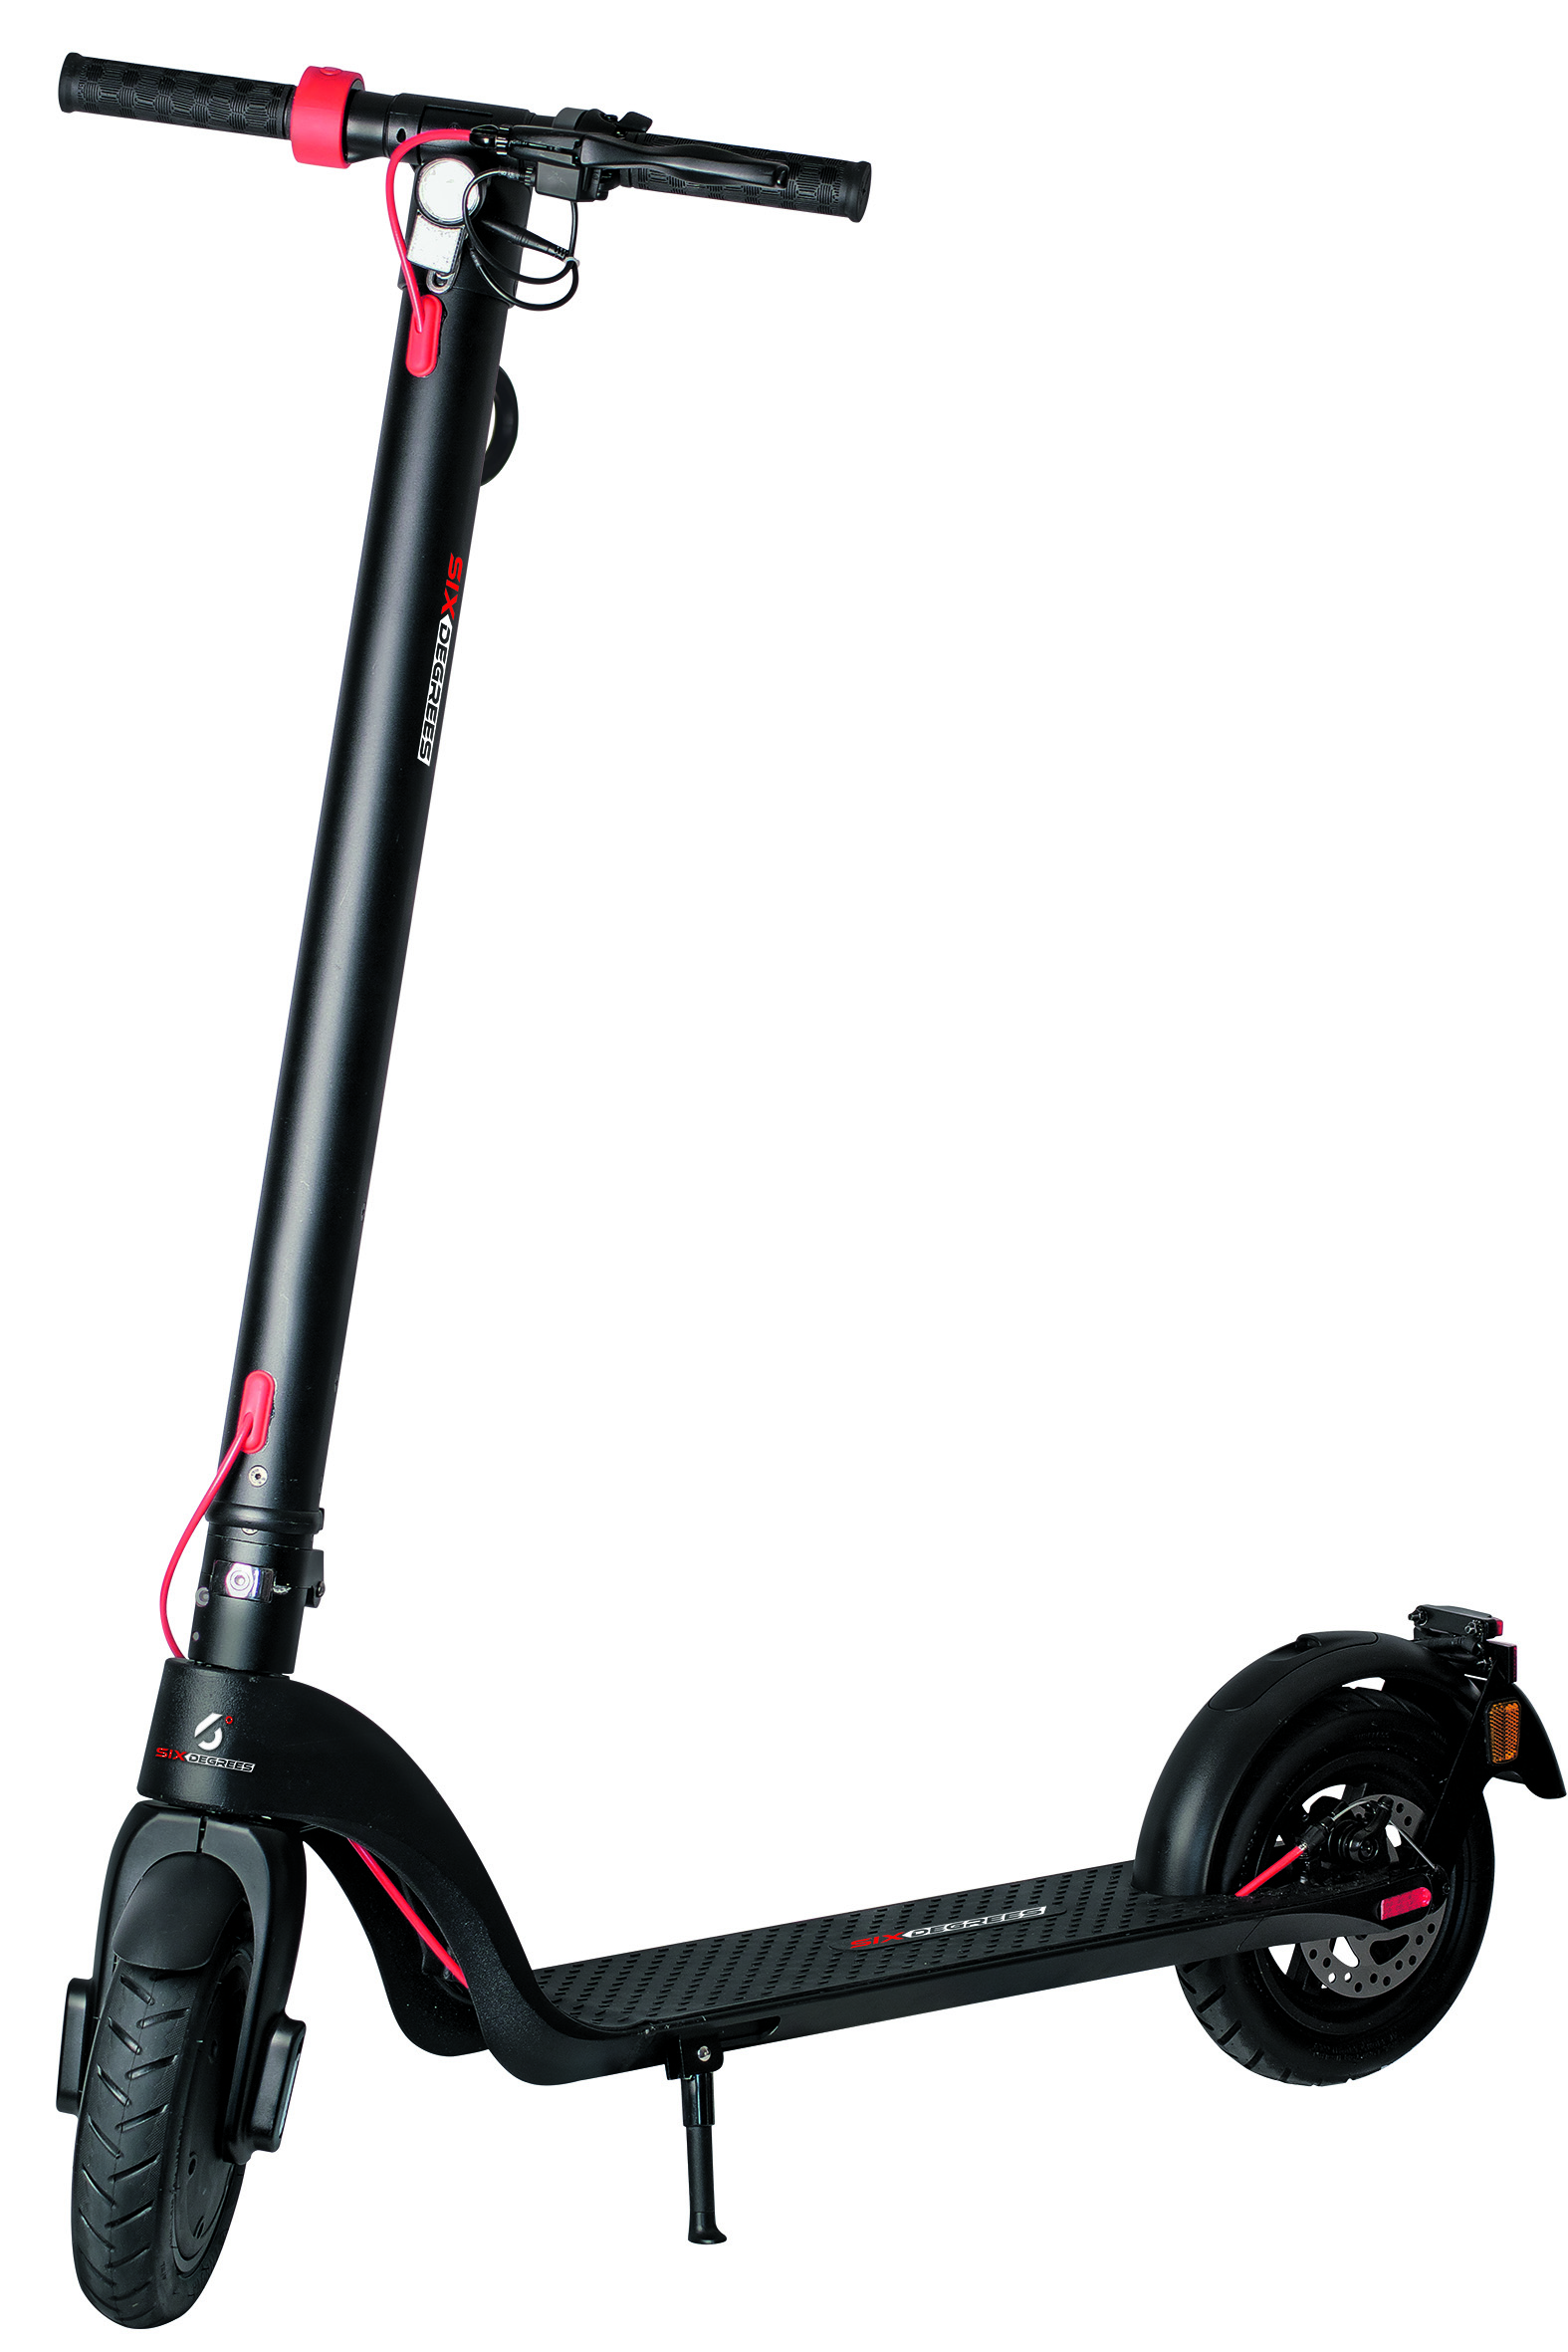 Scoot One faltbarer E-Scooter aus